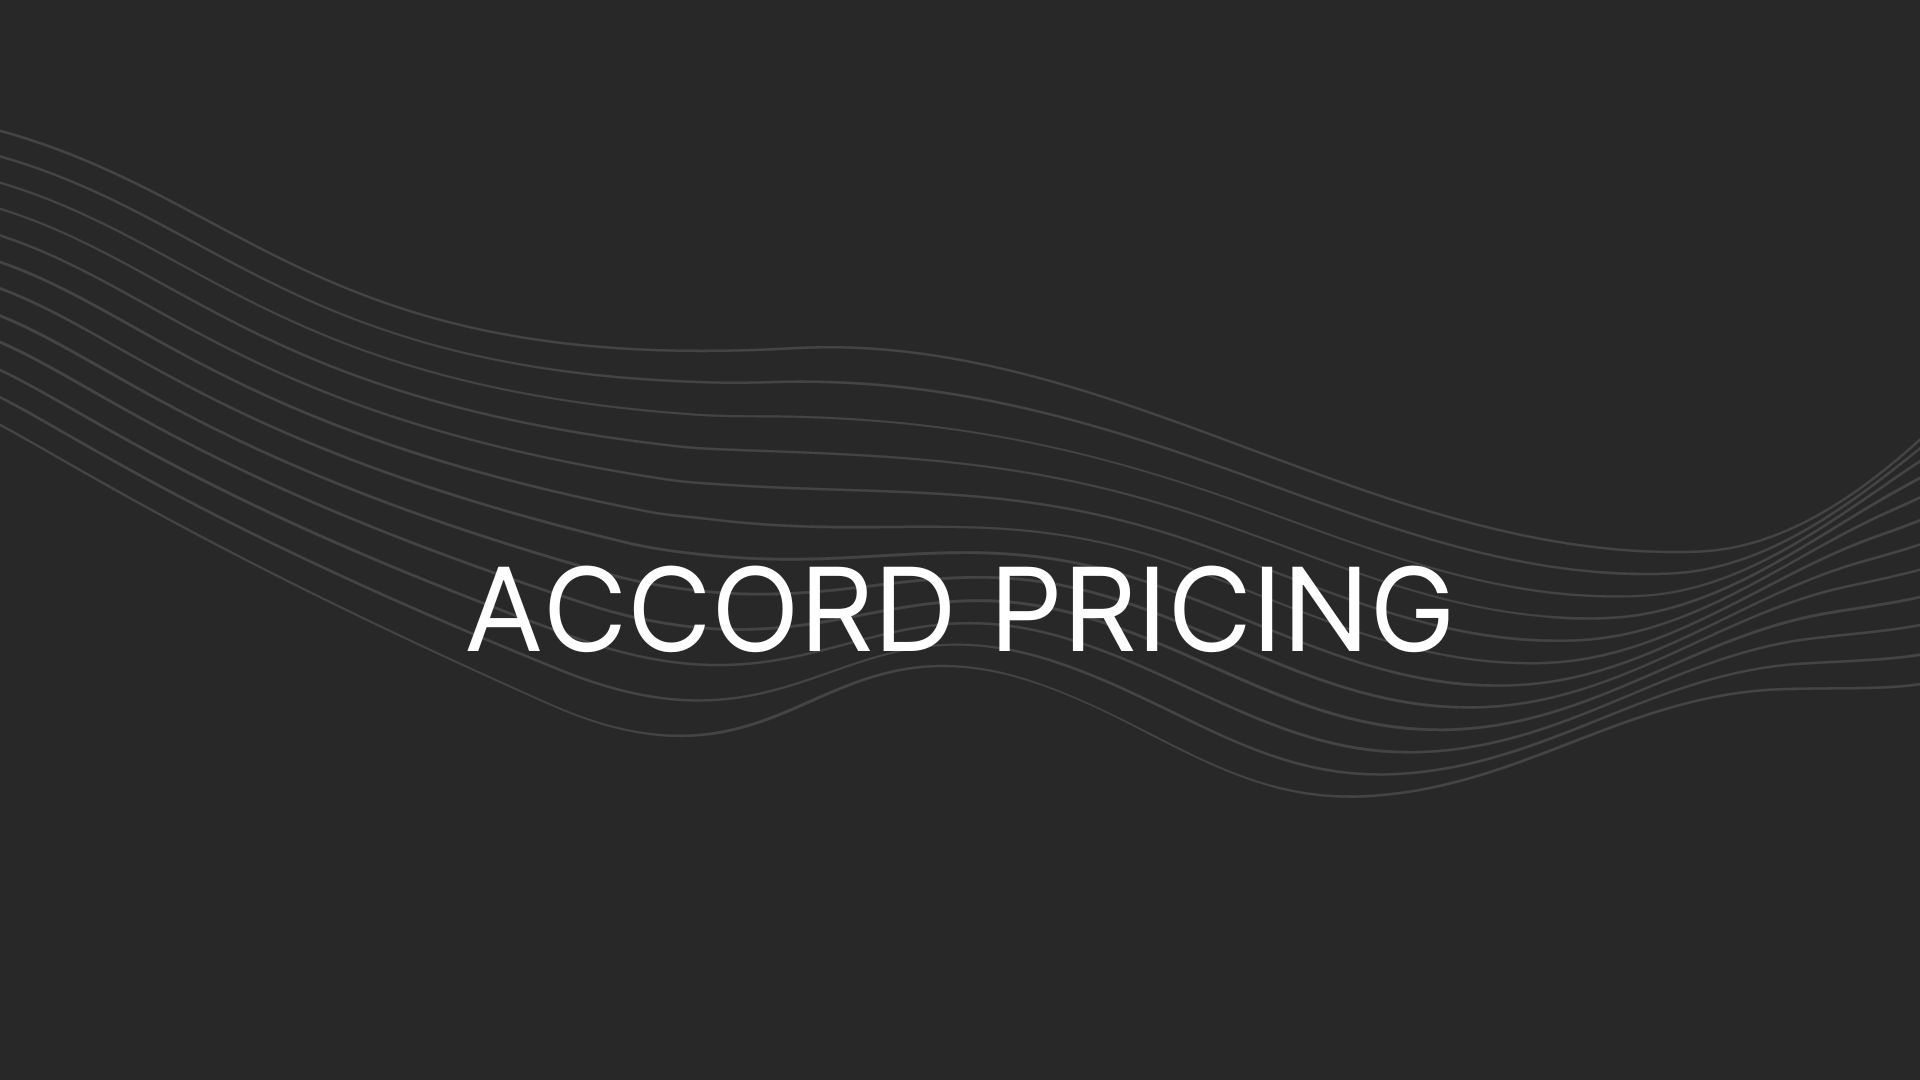 Accord Pricing – Actual Prices For All Plans